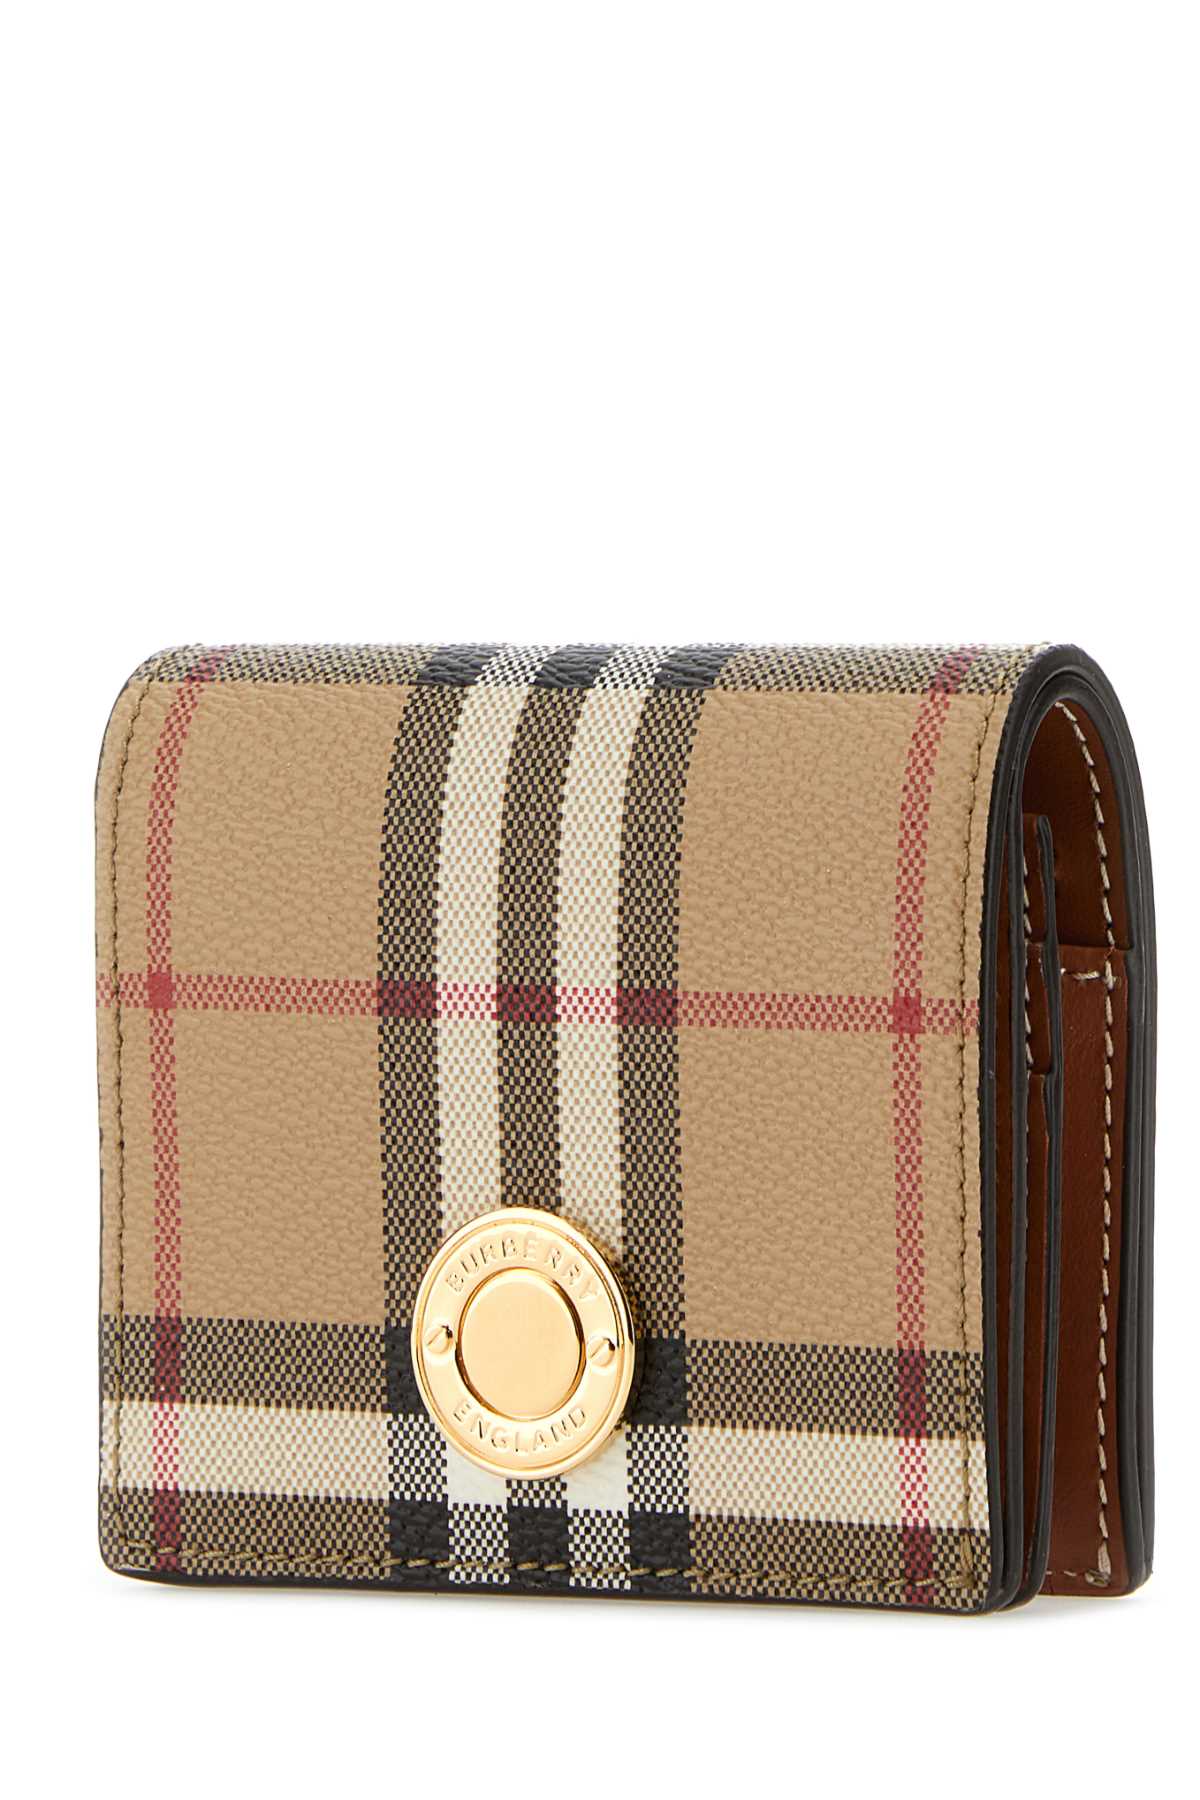 Burberry Printed Canvas Small Wallet In Archivebeige